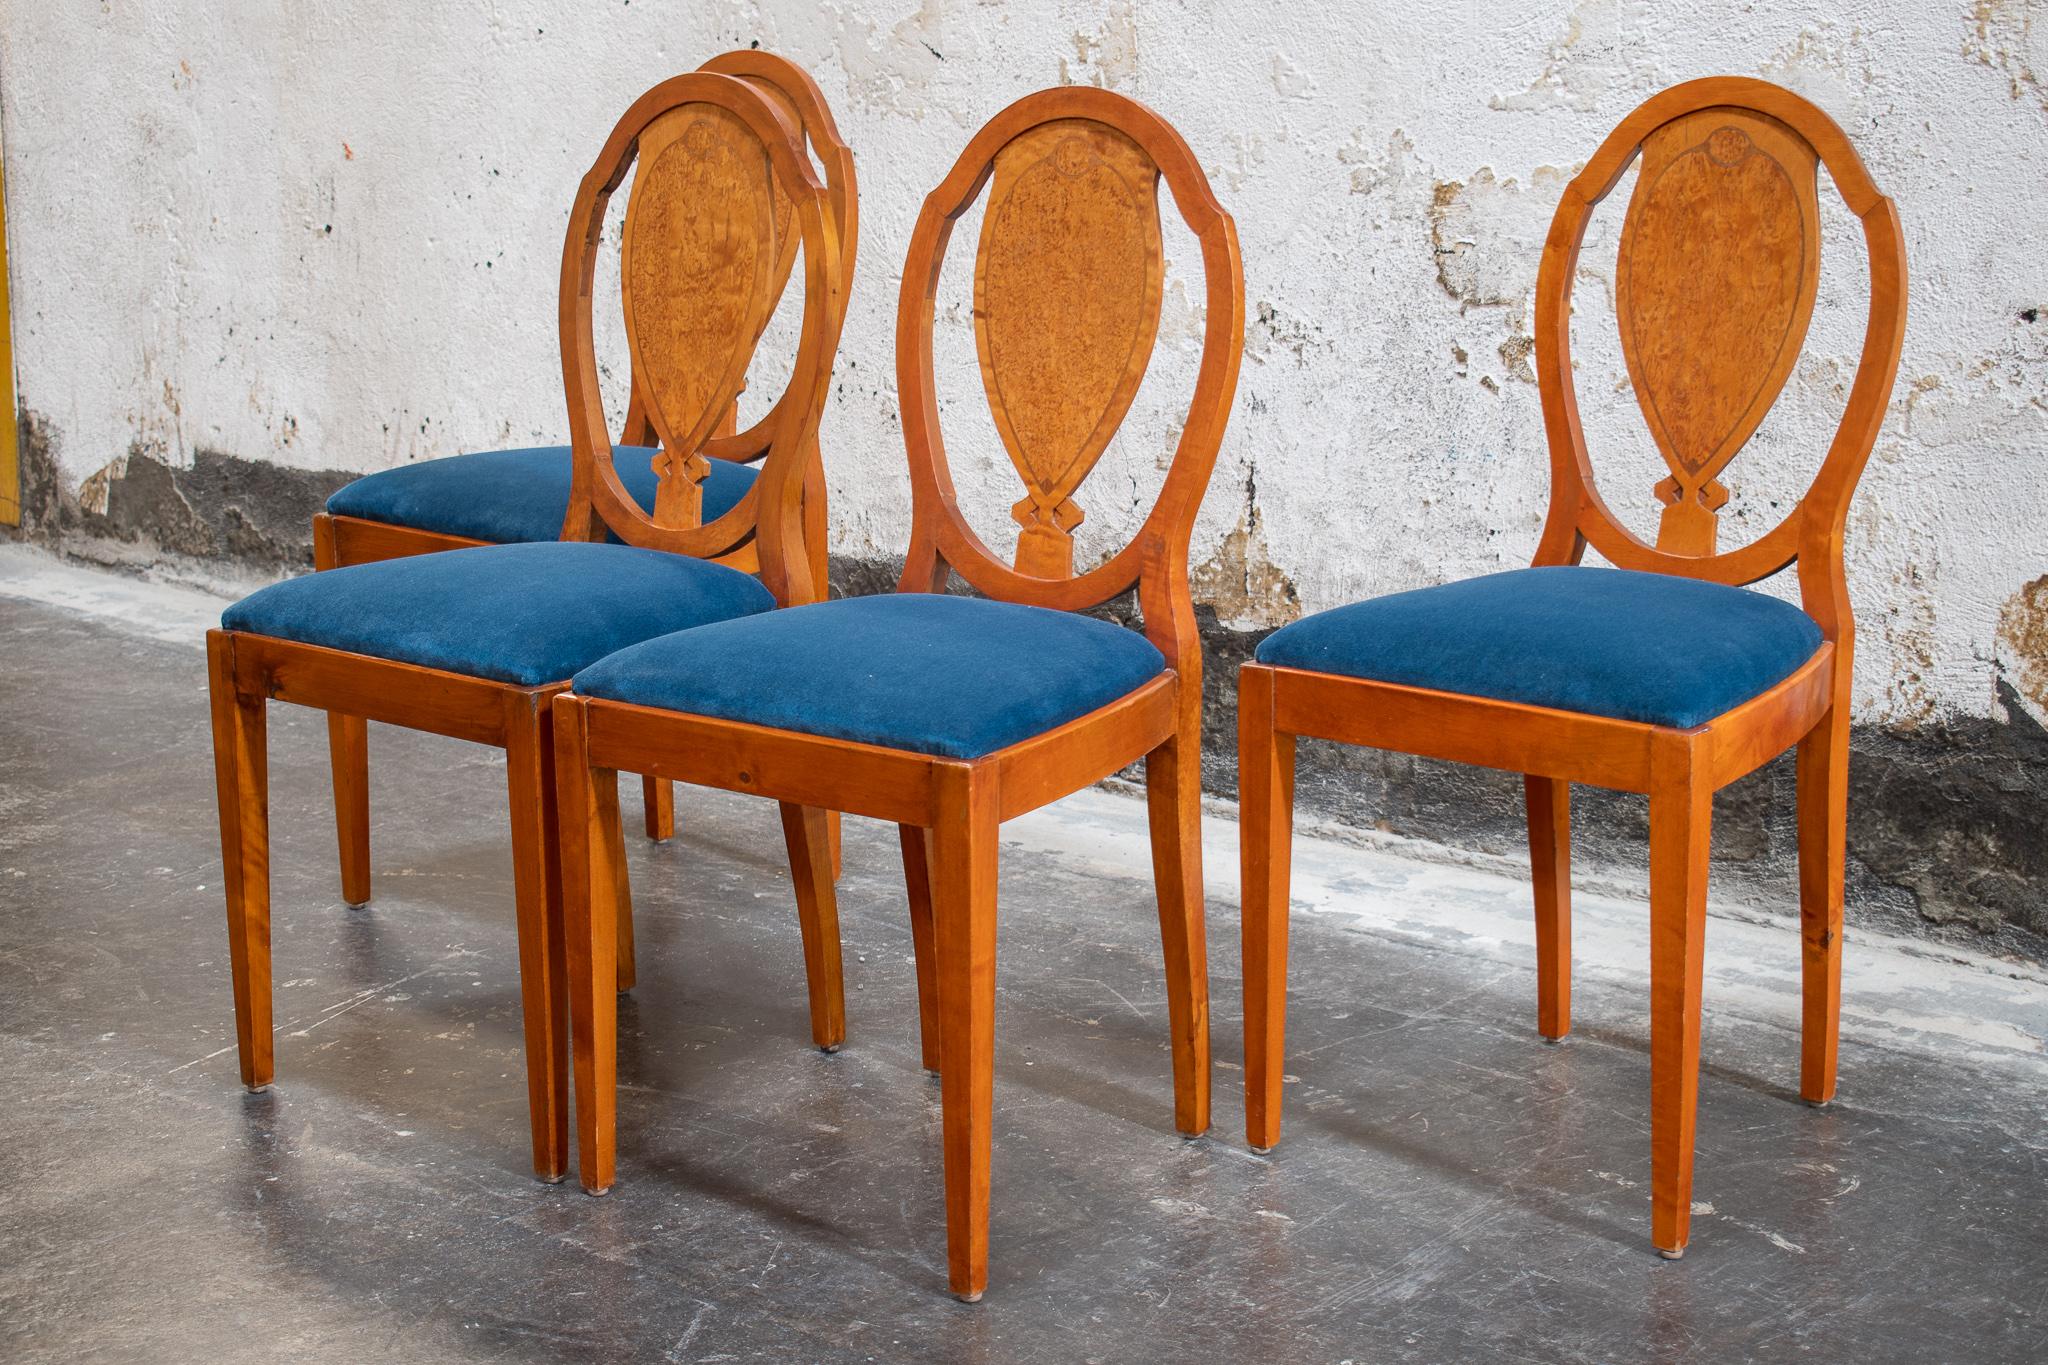 Vintage Swedish Golden Burl Birch Dining Chairs, Set of Four For Sale 1